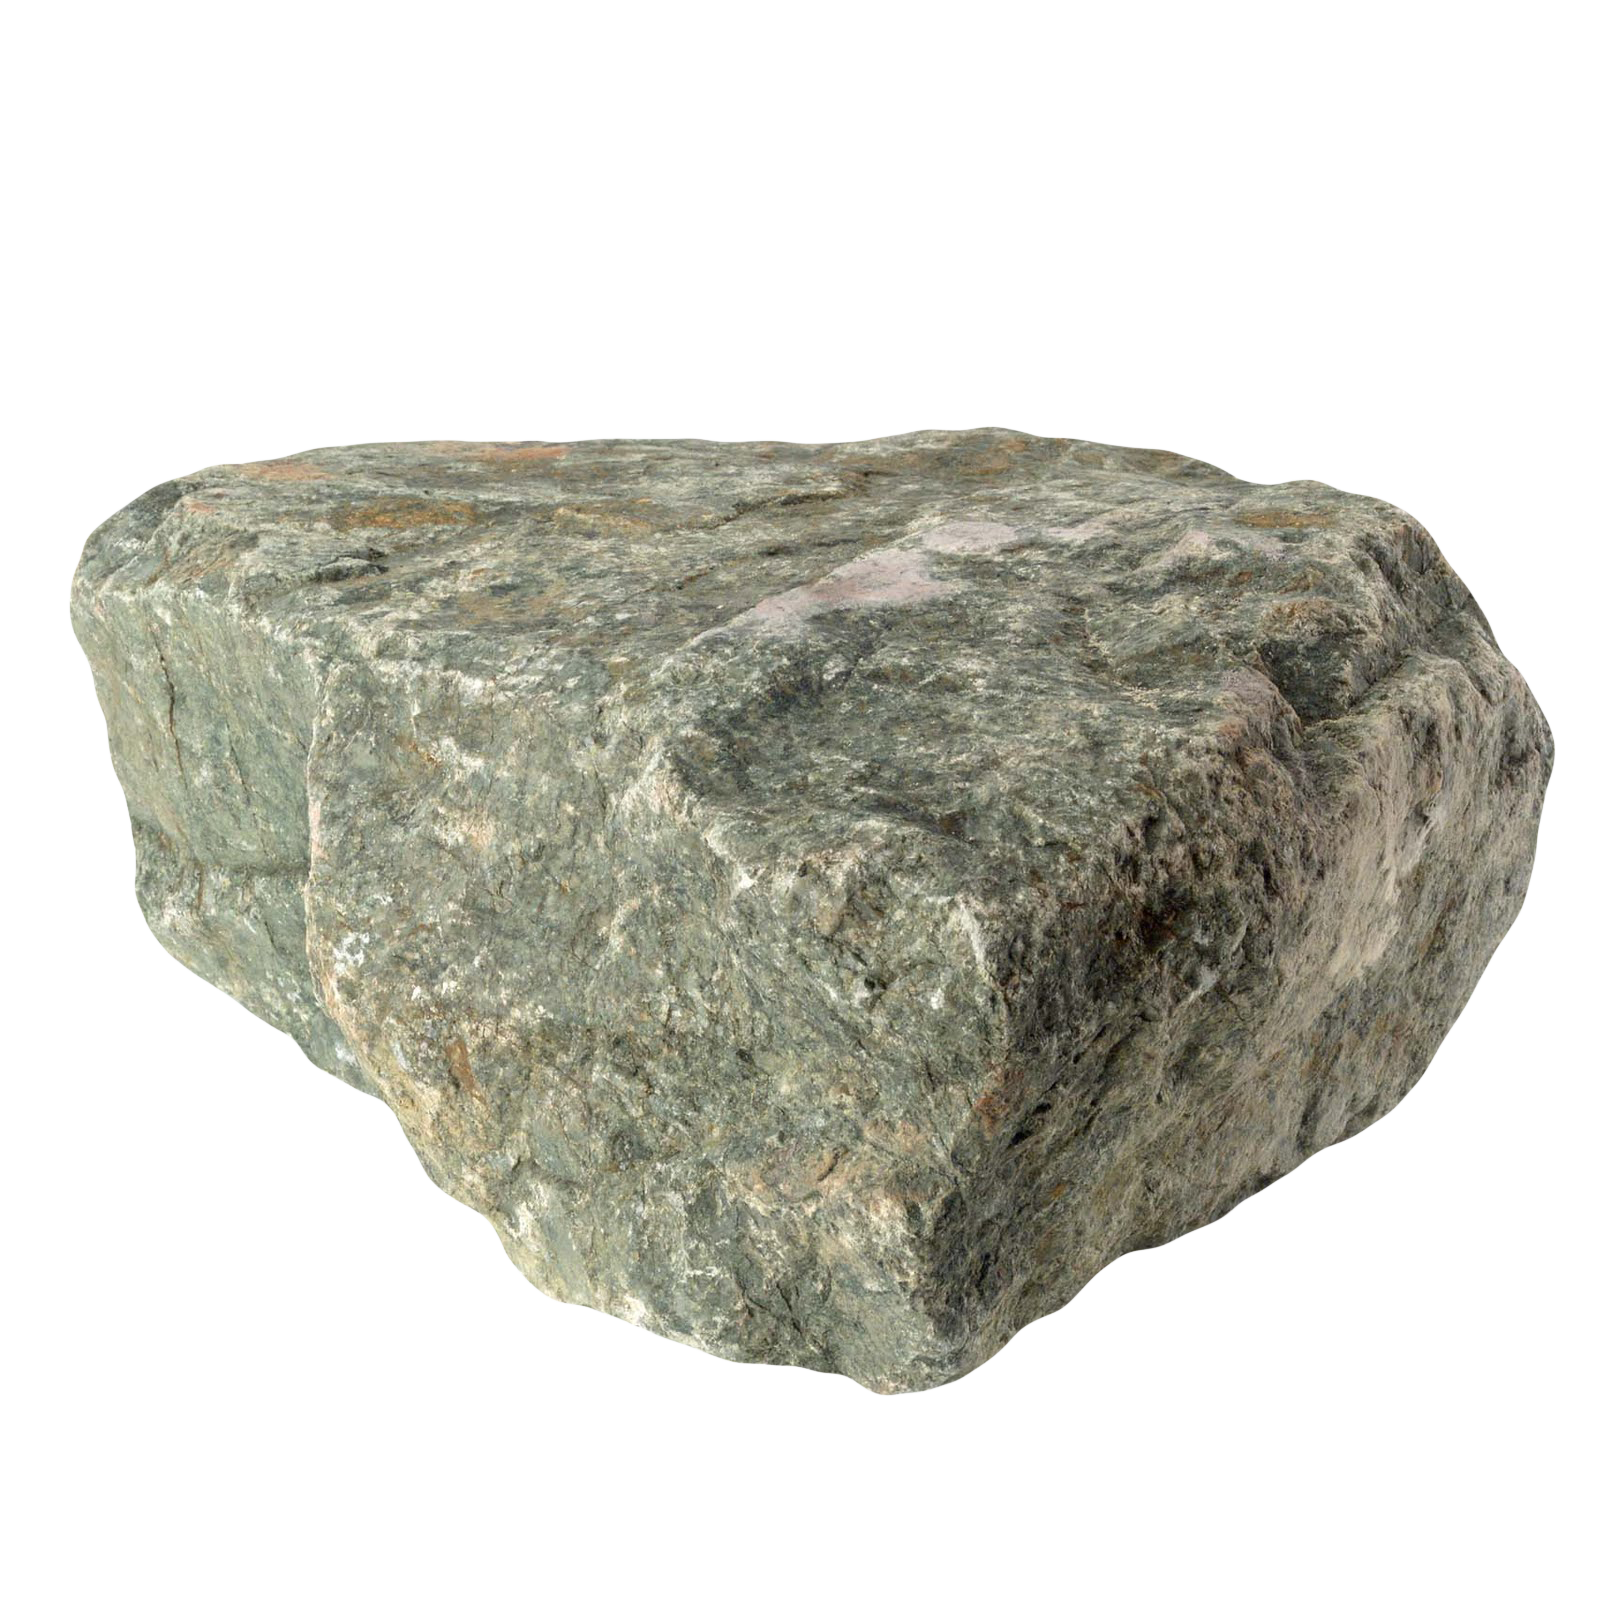 Stone PNG images, rock PNG, rocks PNG images free download.